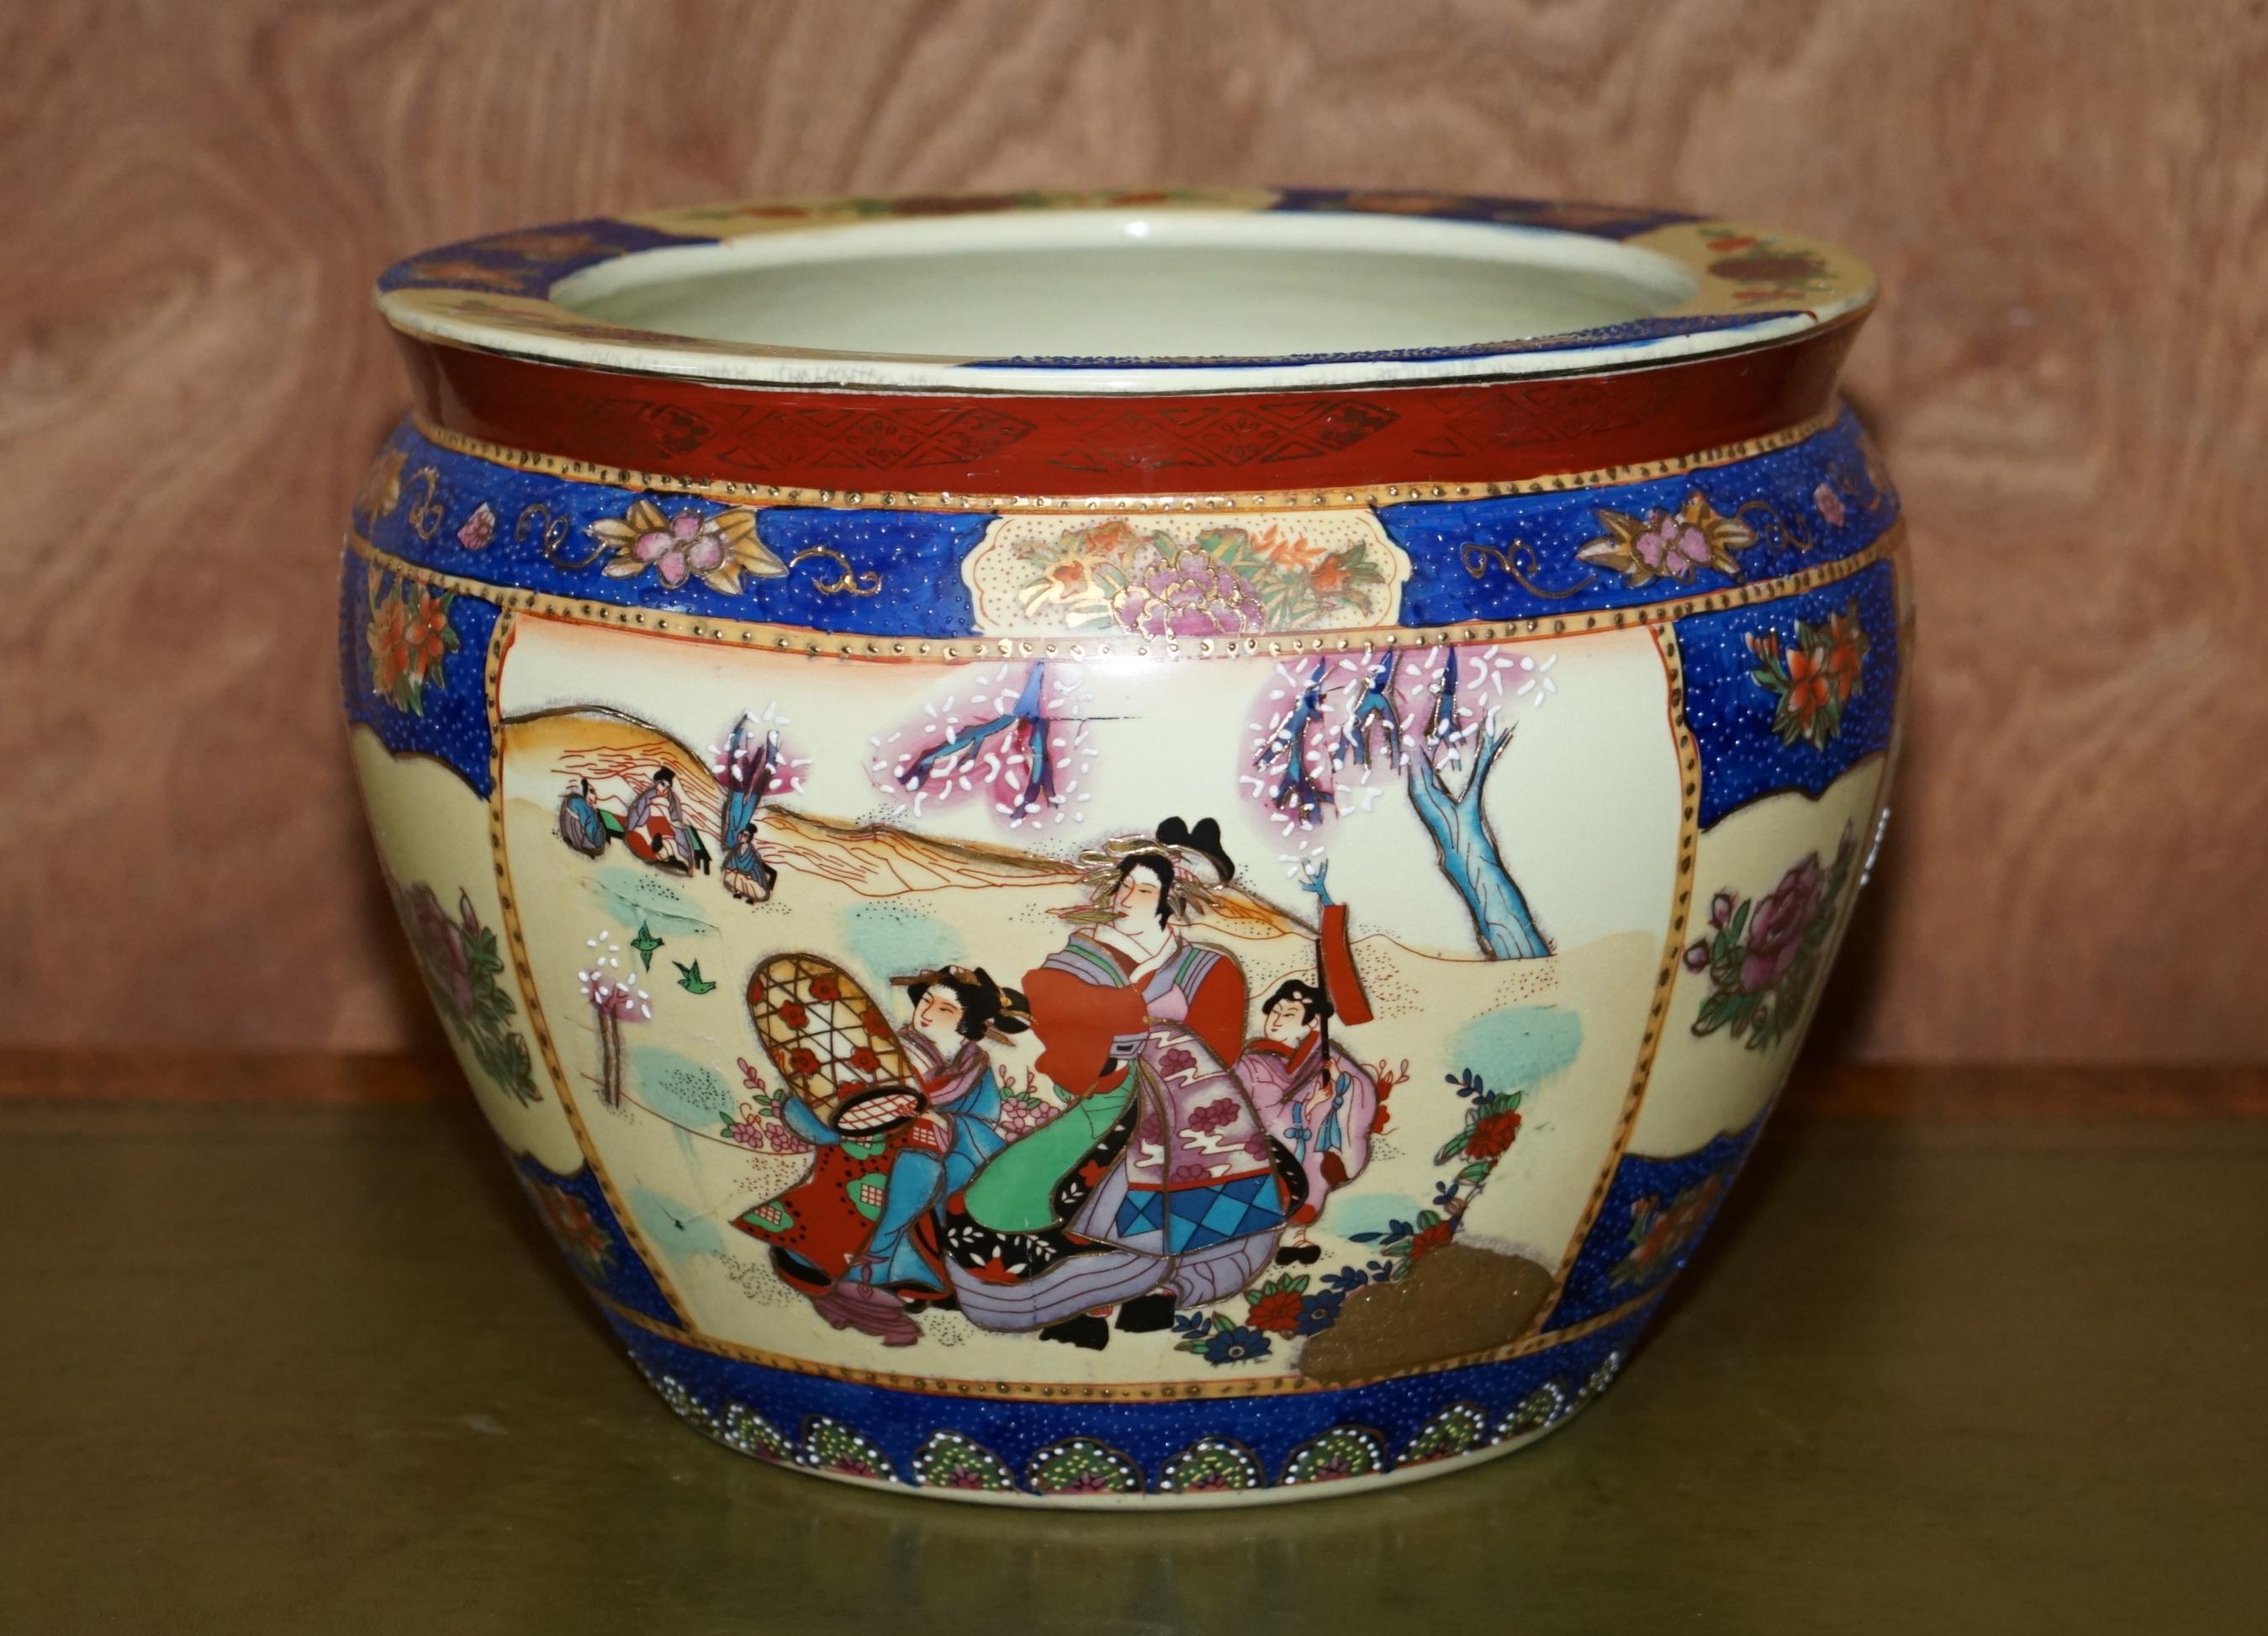 We are delighted to offer for sale this lovely Vintage Chinese Export Satsuma Moriage Geishas Koi Fish Bowl 

A very good looking well made and decorative piece, ideally suited for pure decoration or as an actual fish bowl! This piece really